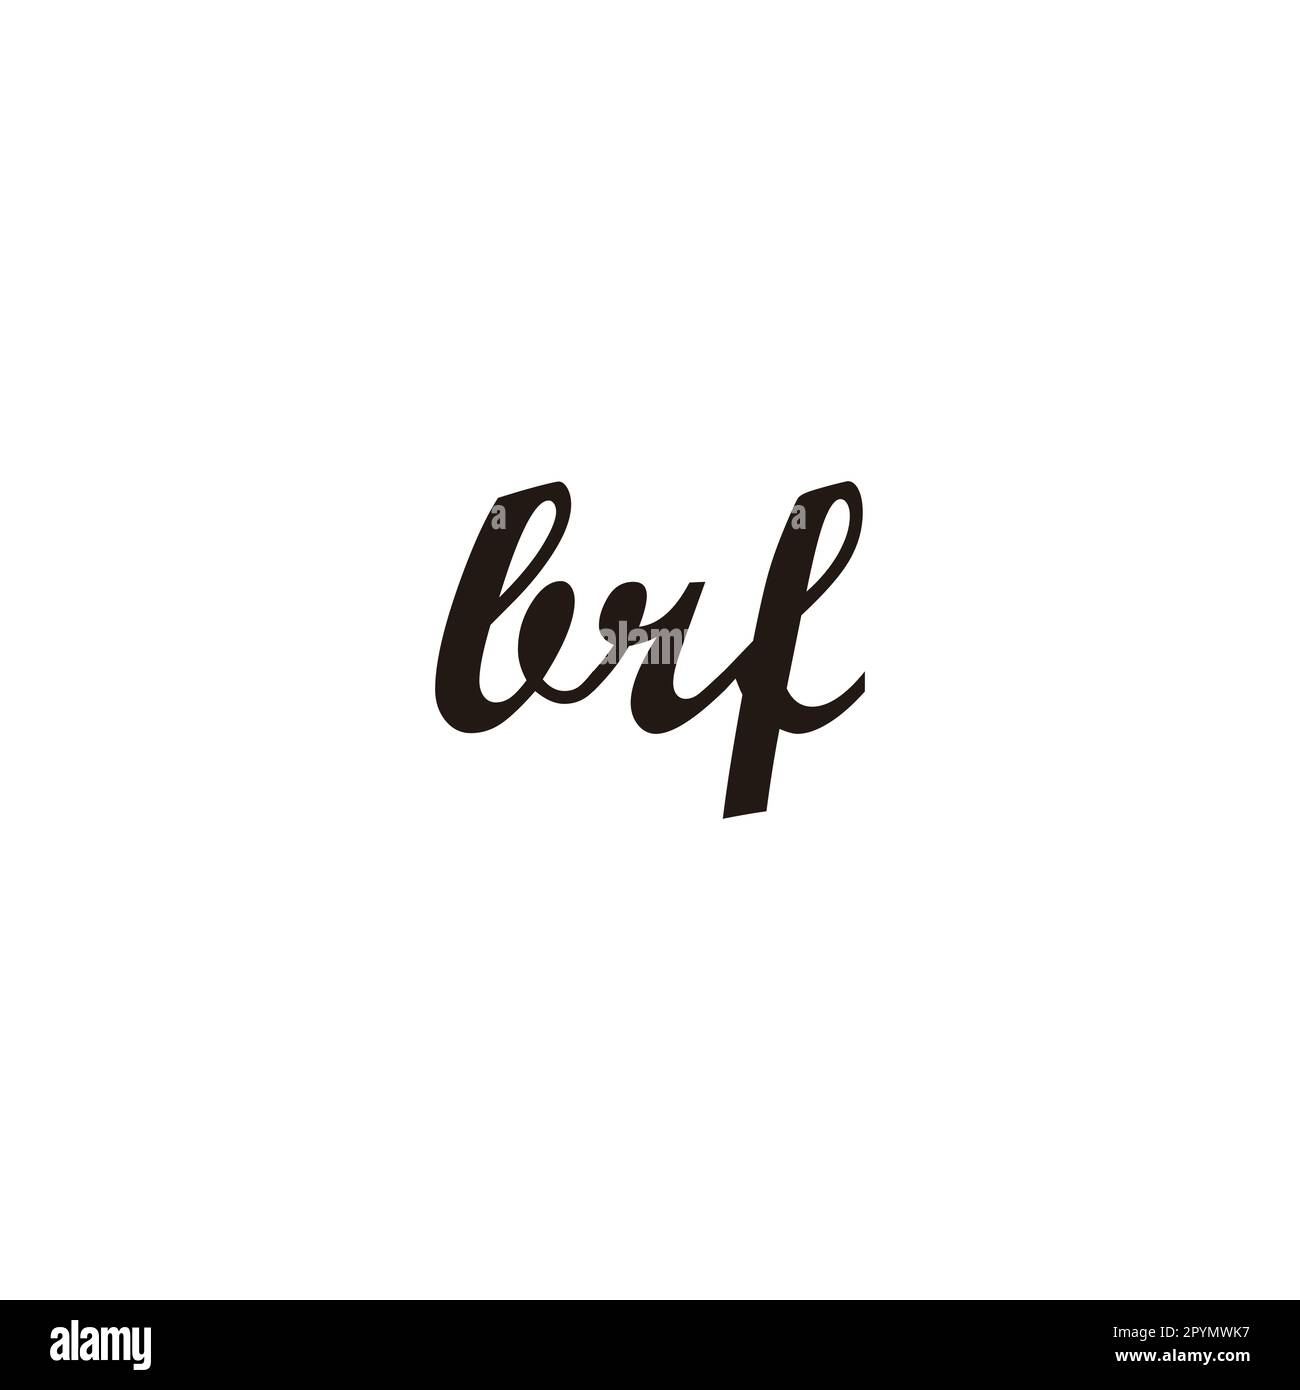 Letter brf connect geometric symbol simple logo vector Stock Vector